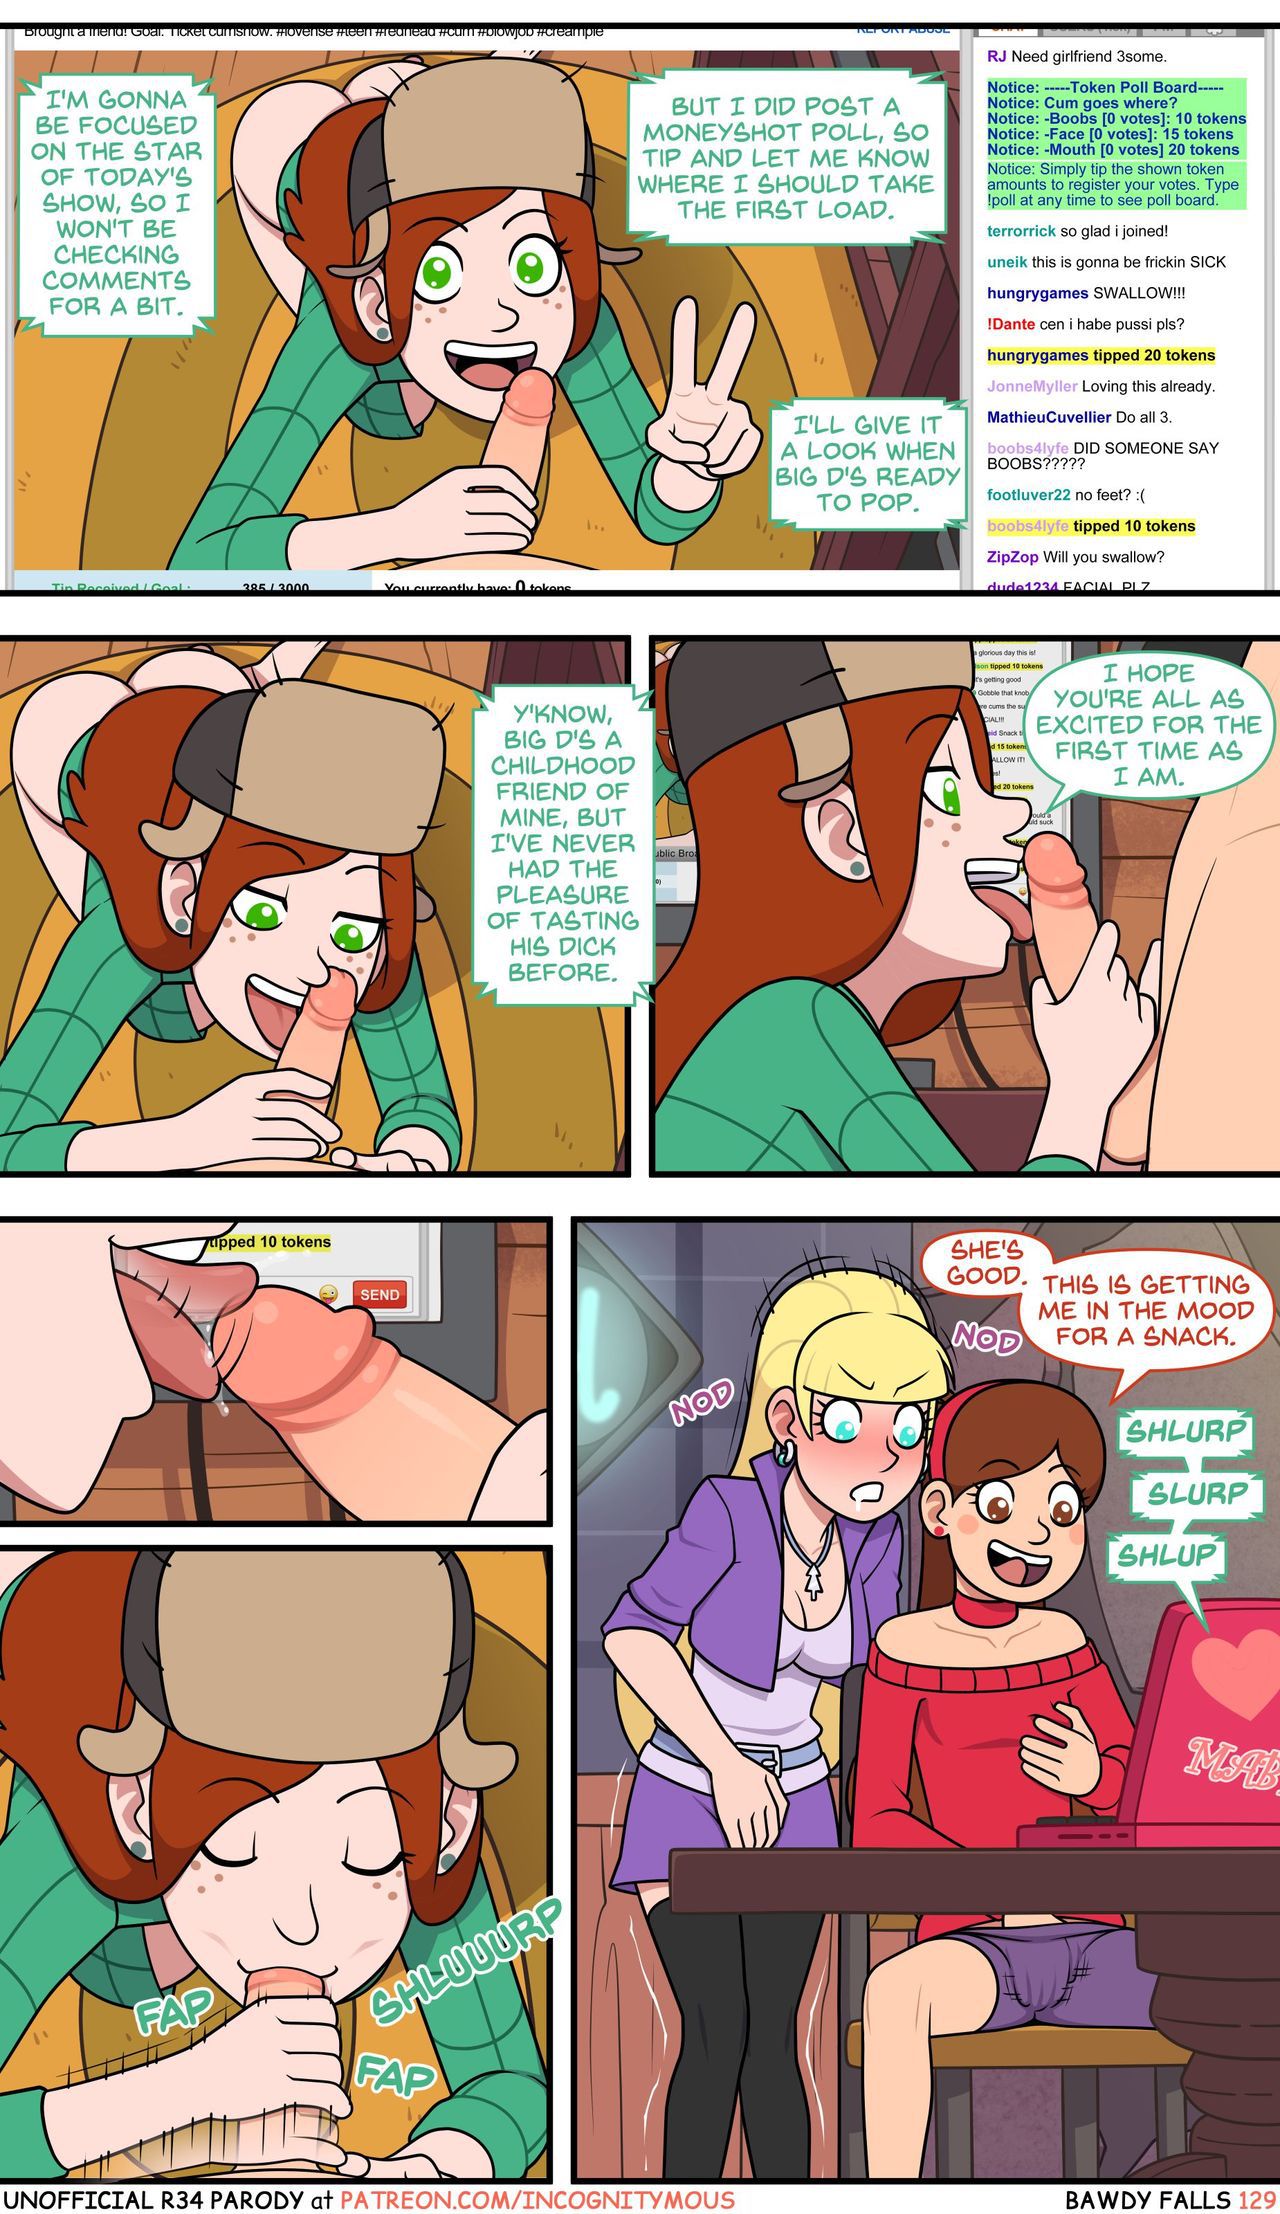 Bawdy Falls (Gravity Falls) [Incognitymous] - 3 - ongoing - english 9